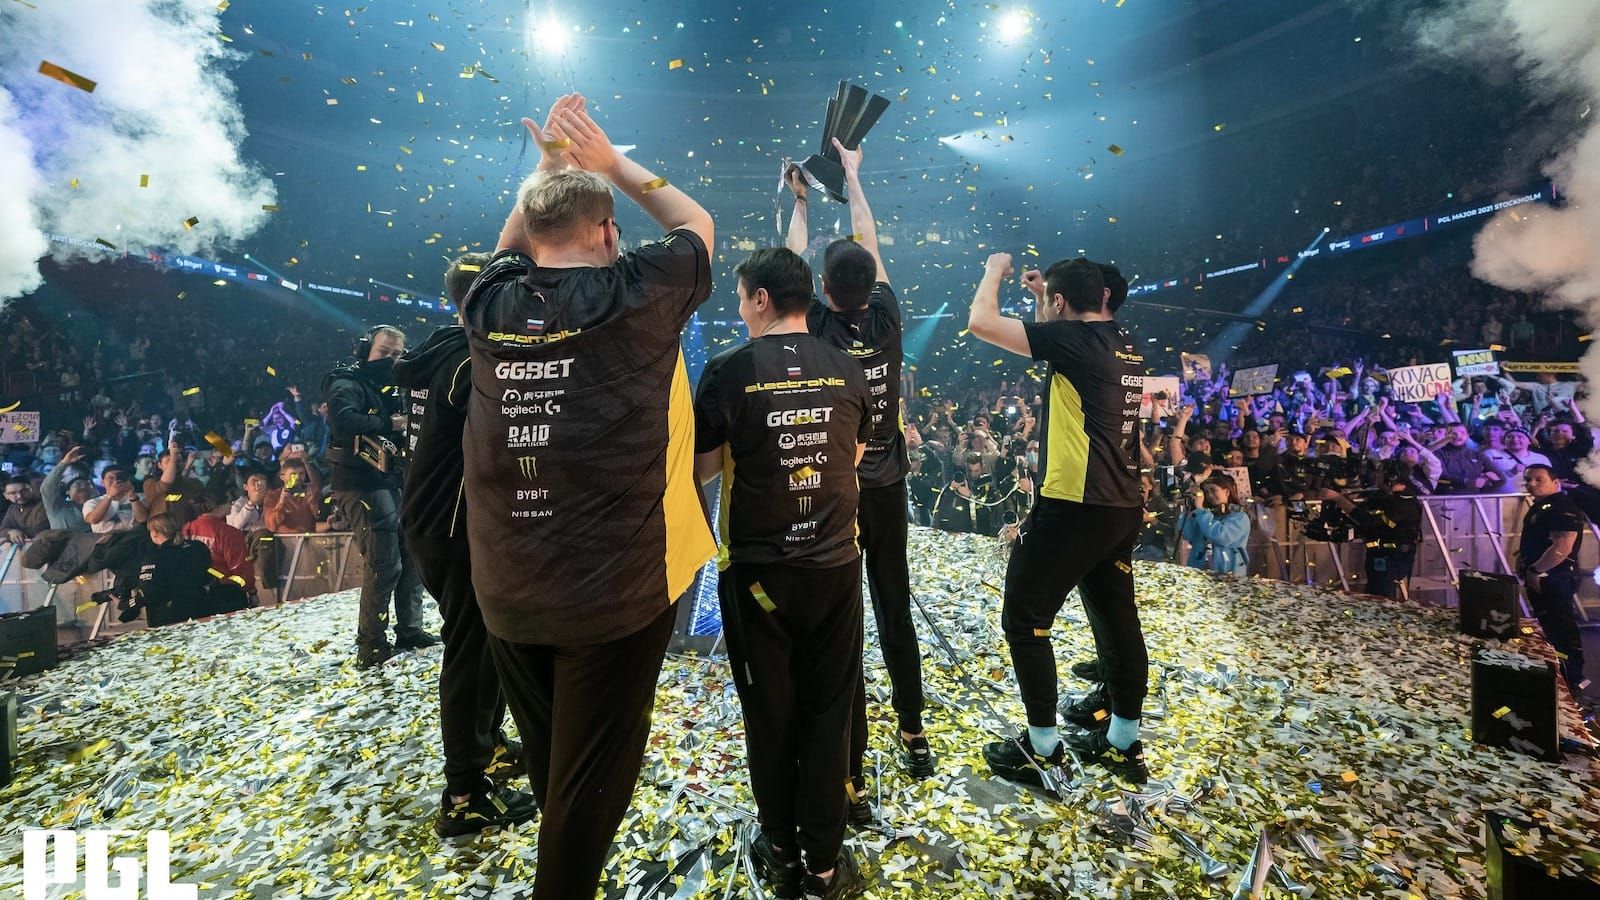 CS:GO team Natus Vincere lift the trophy at PGL Major Stockholm as confetti falls and crowd cheers